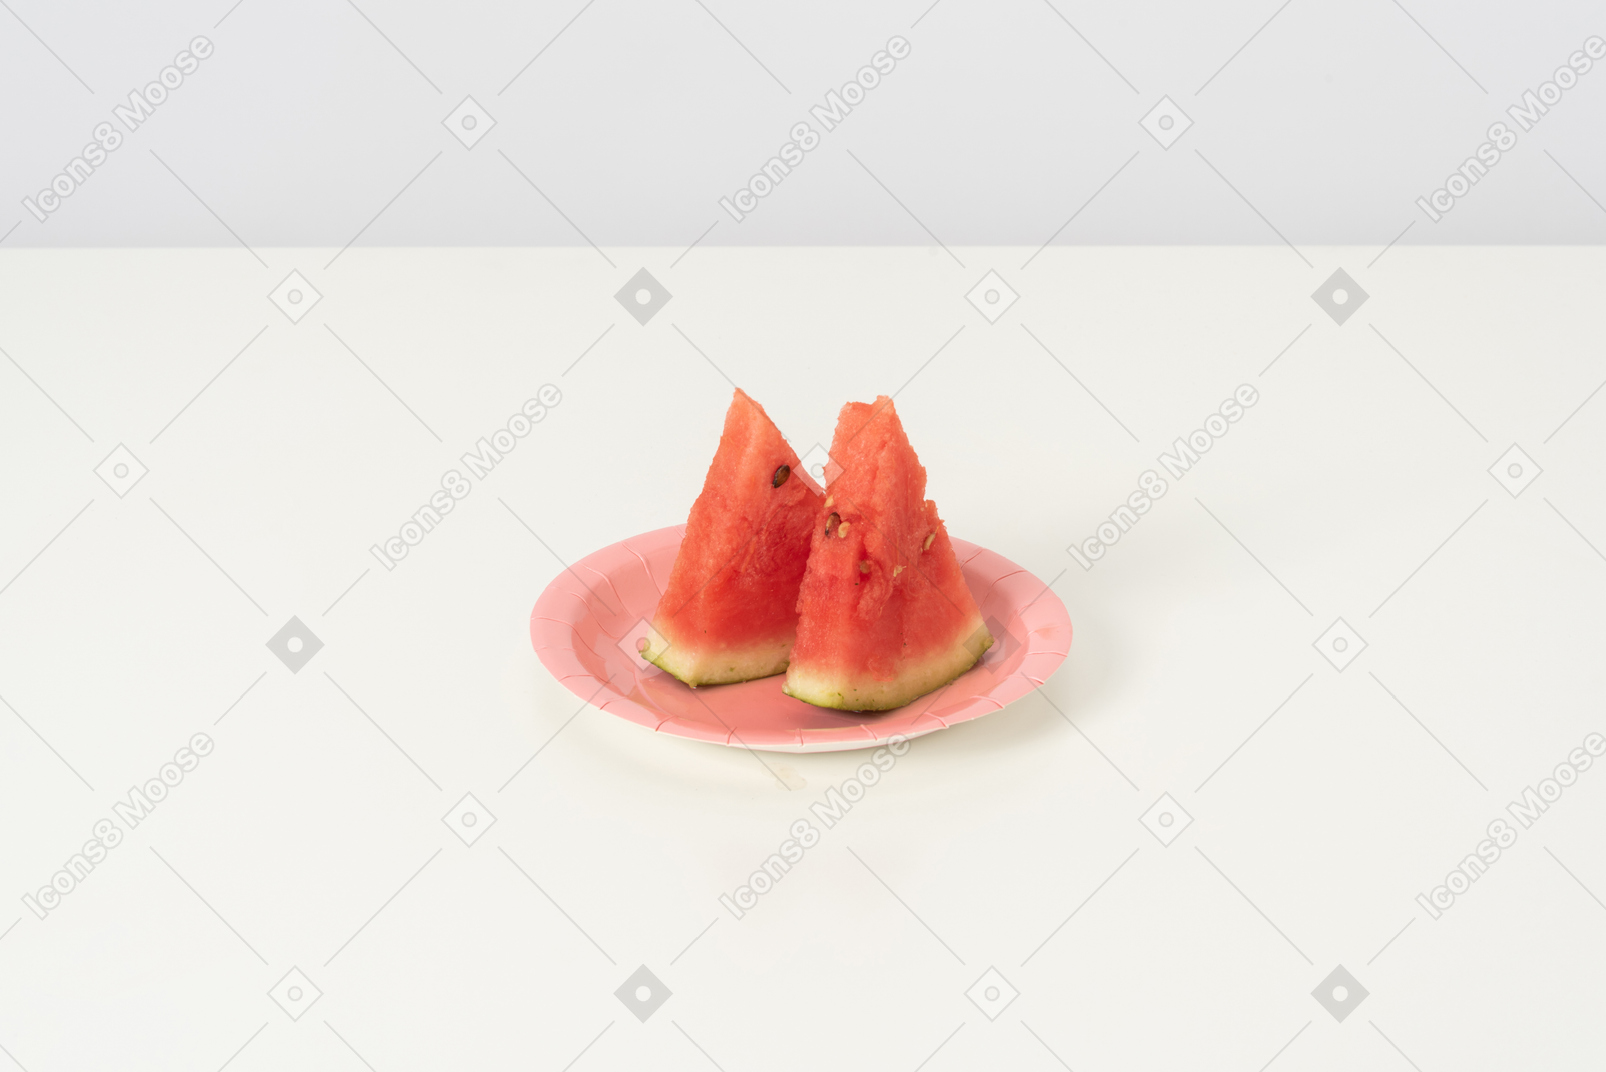 Two slices of a sweet ripe watermelon, lying isolated against a white background on a cute pink plate